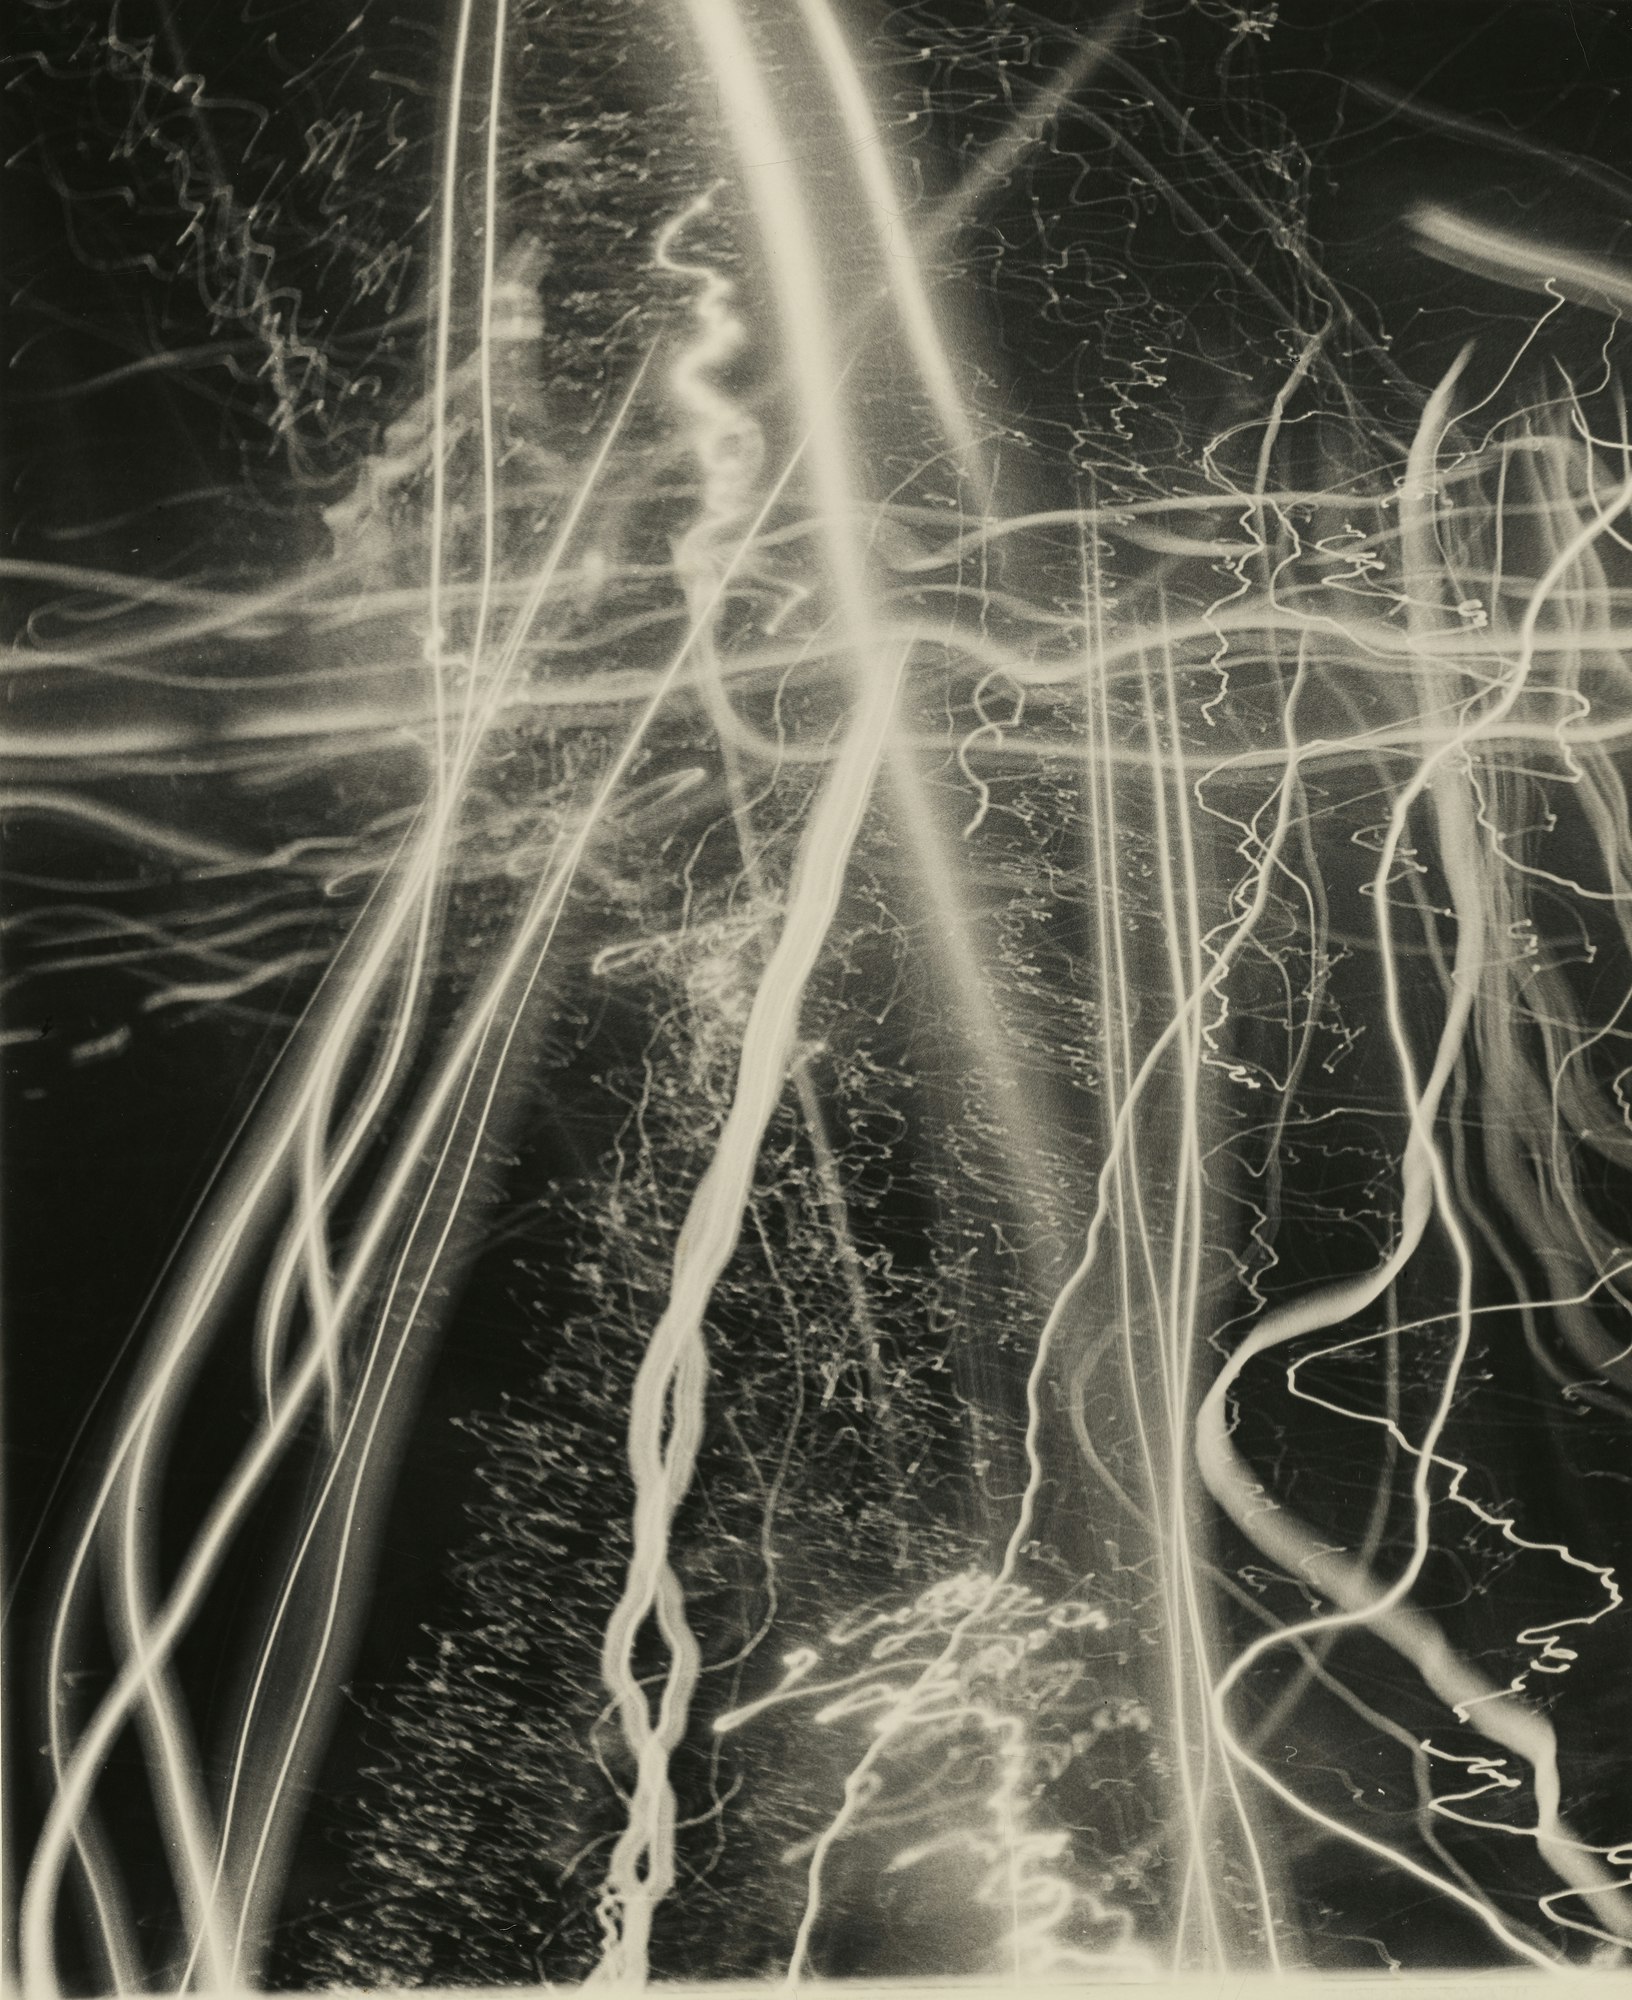 "Car Light Study #7," 1939, Nathan Lerner. Getty Museum. Purchased in part with funds provided by an anonymous donor in memory of James N. Wood. ©Estate of Nathan Lerner.